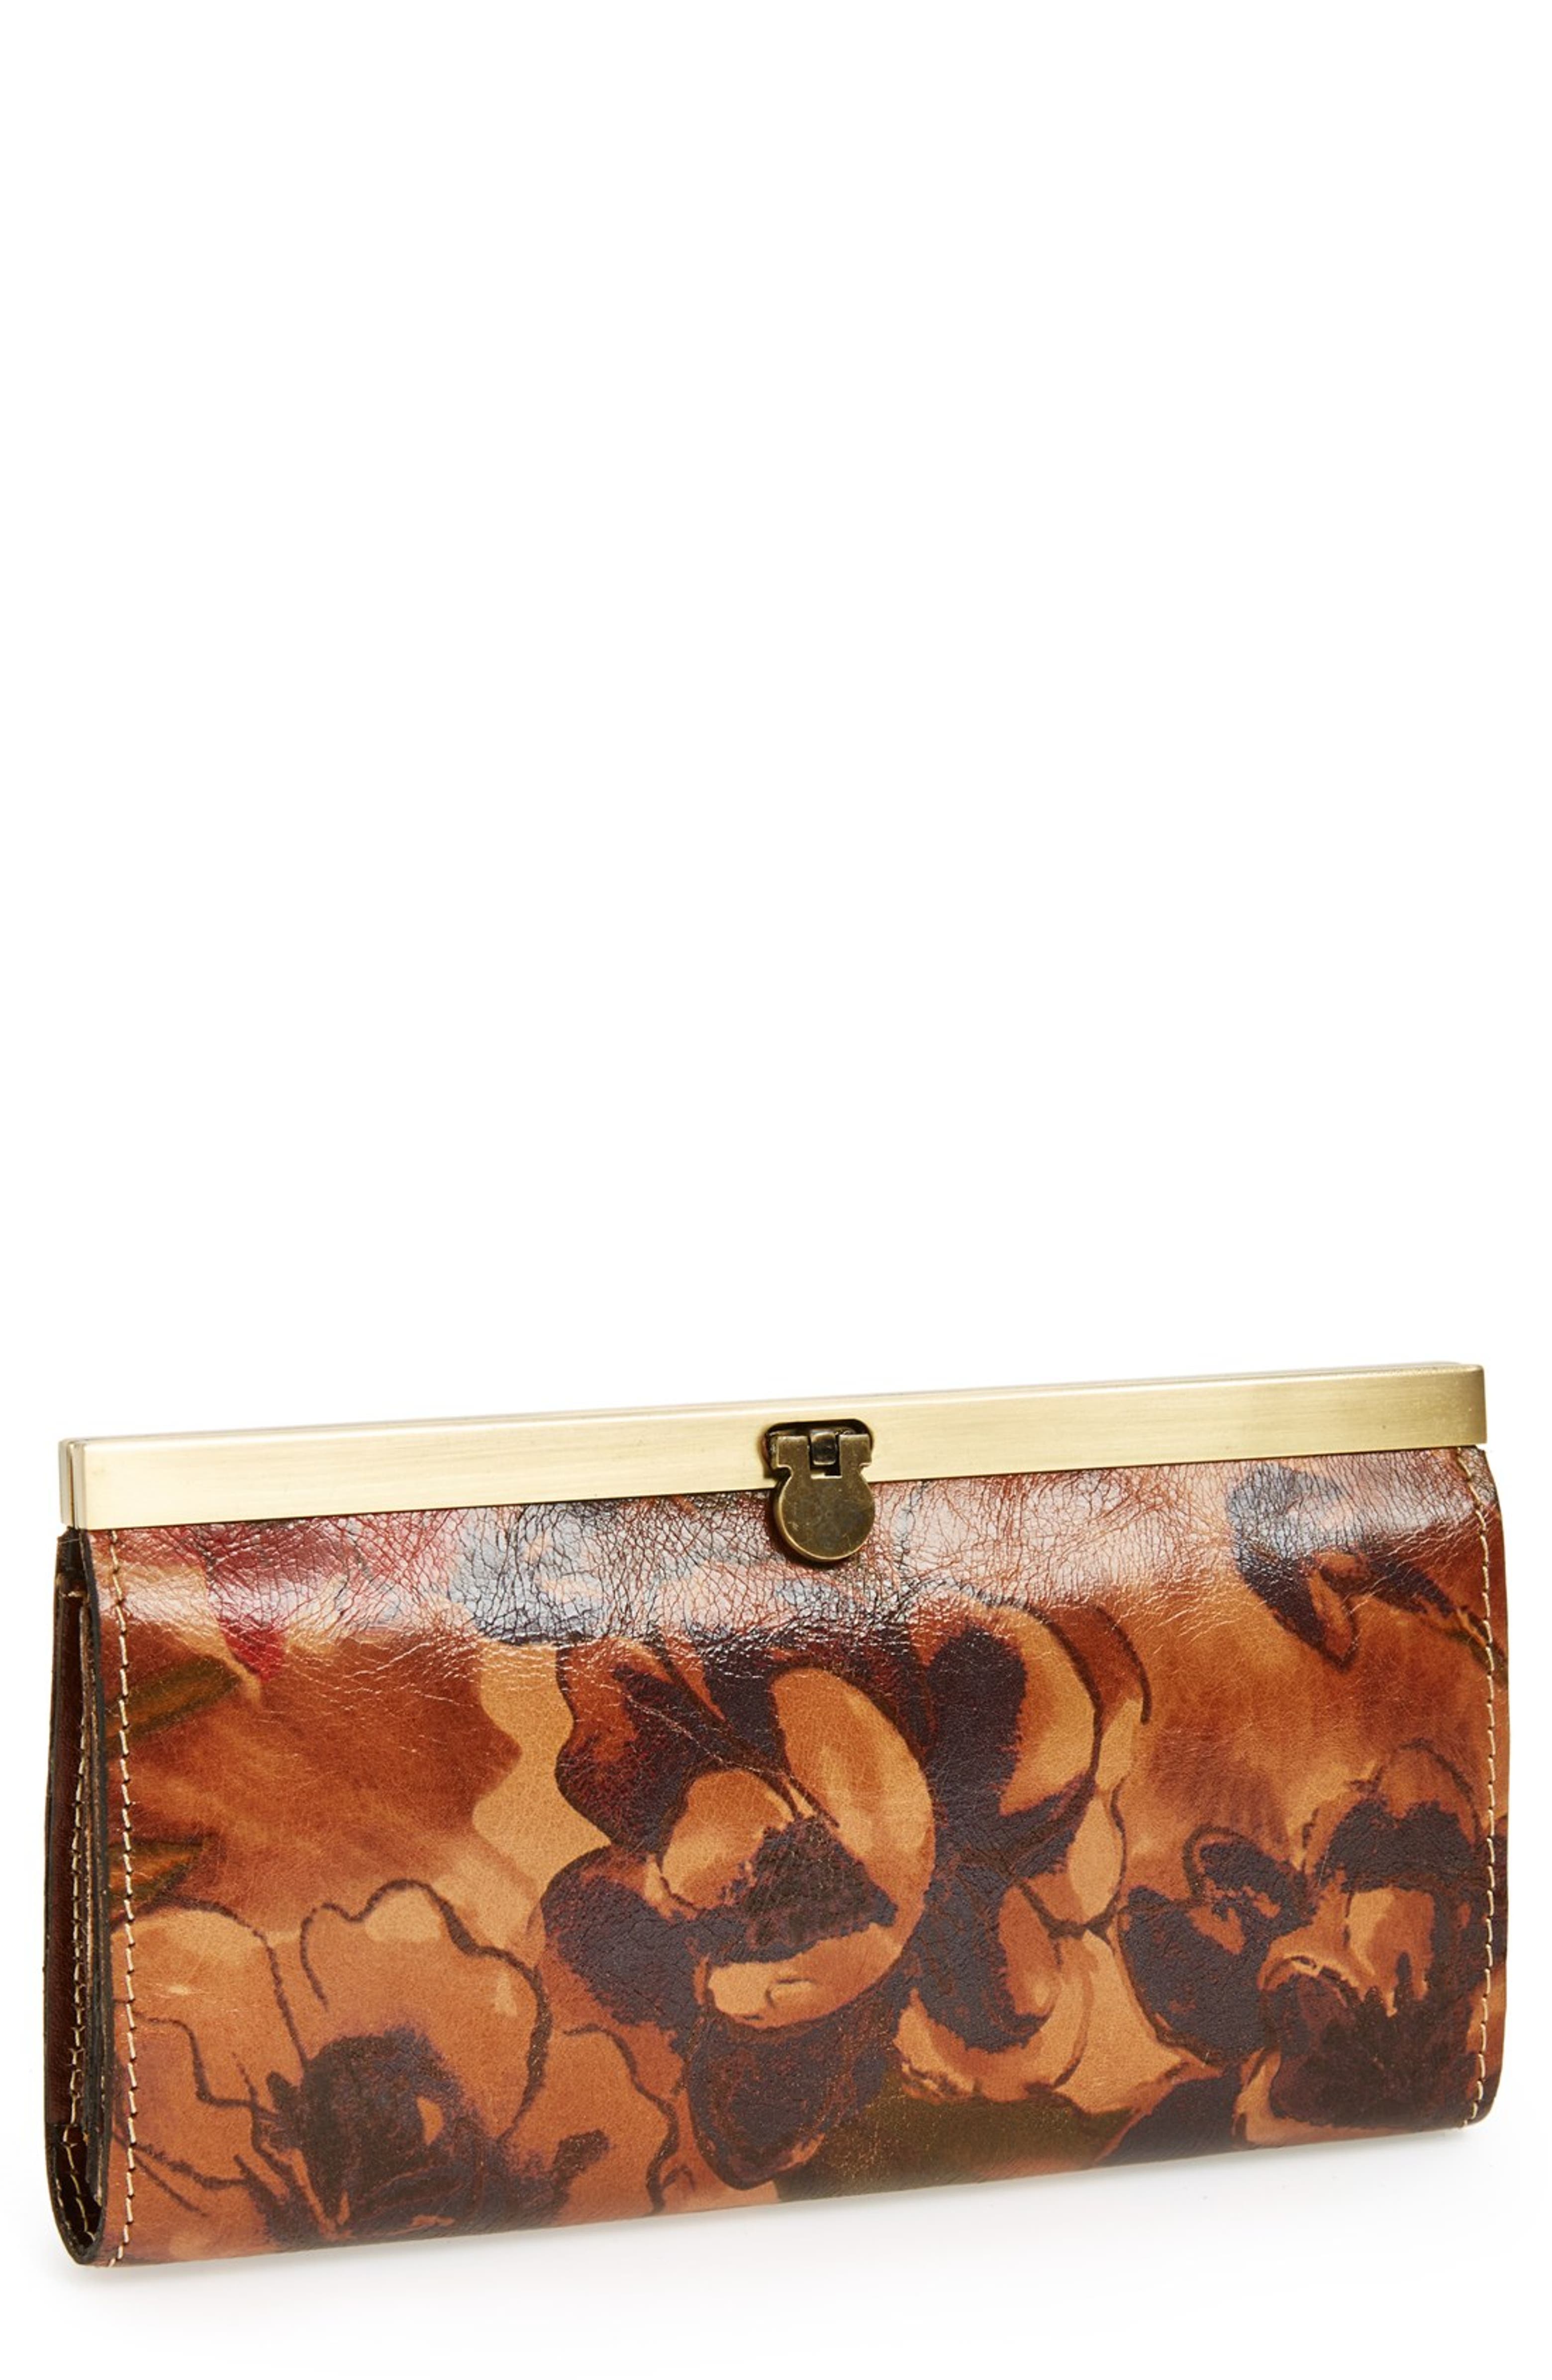 Patricia Nash 'Cauchy' Leather Wallet | Nordstrom